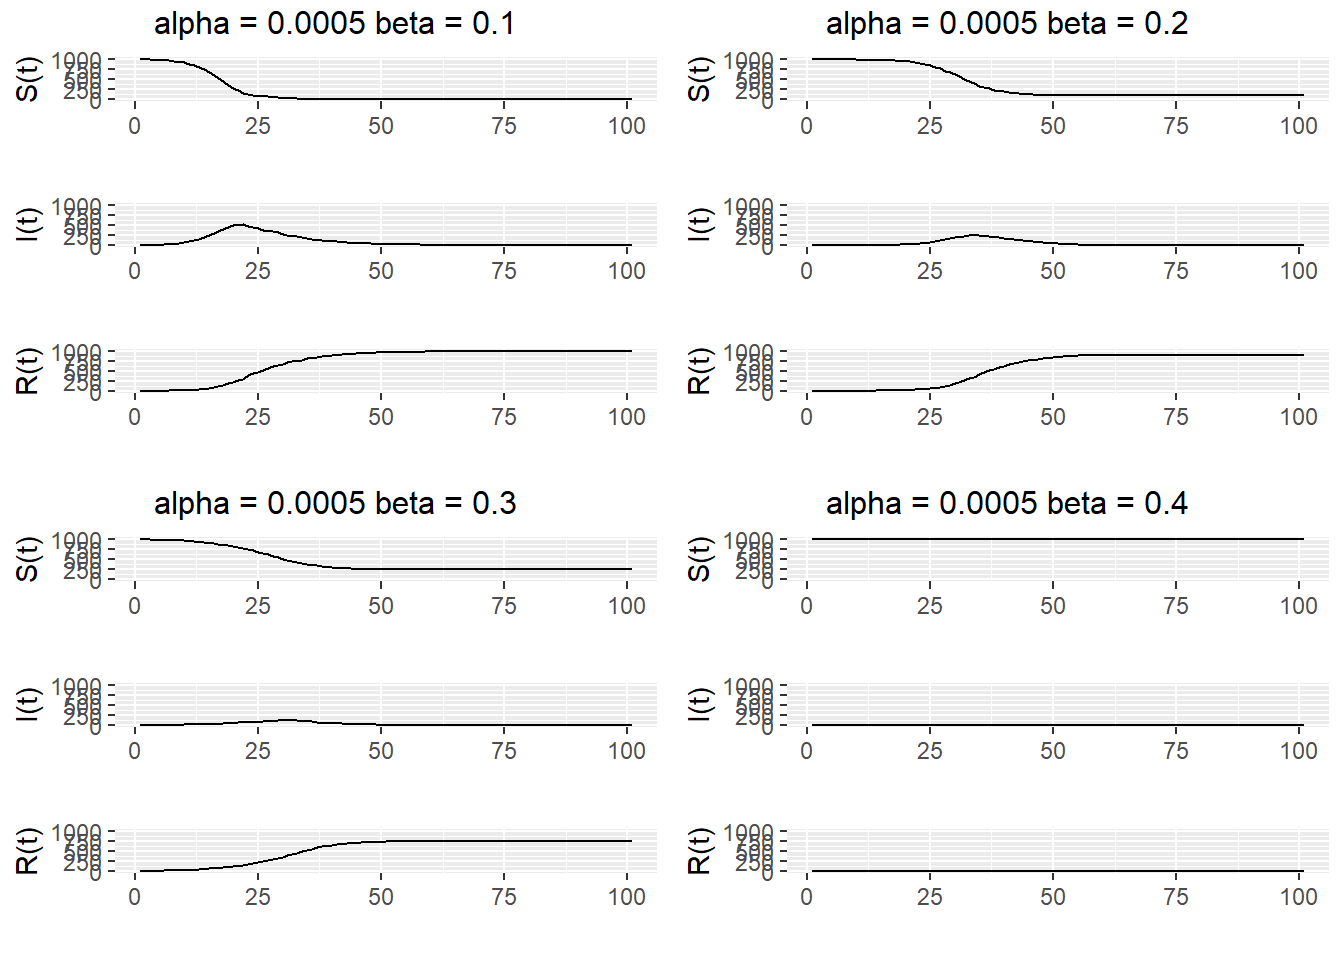 Simulations of a SIR epidemic with $\alpha$ = 0.0005$ and $\beta = 0.1, 0.2, 0.3, 0.4$.